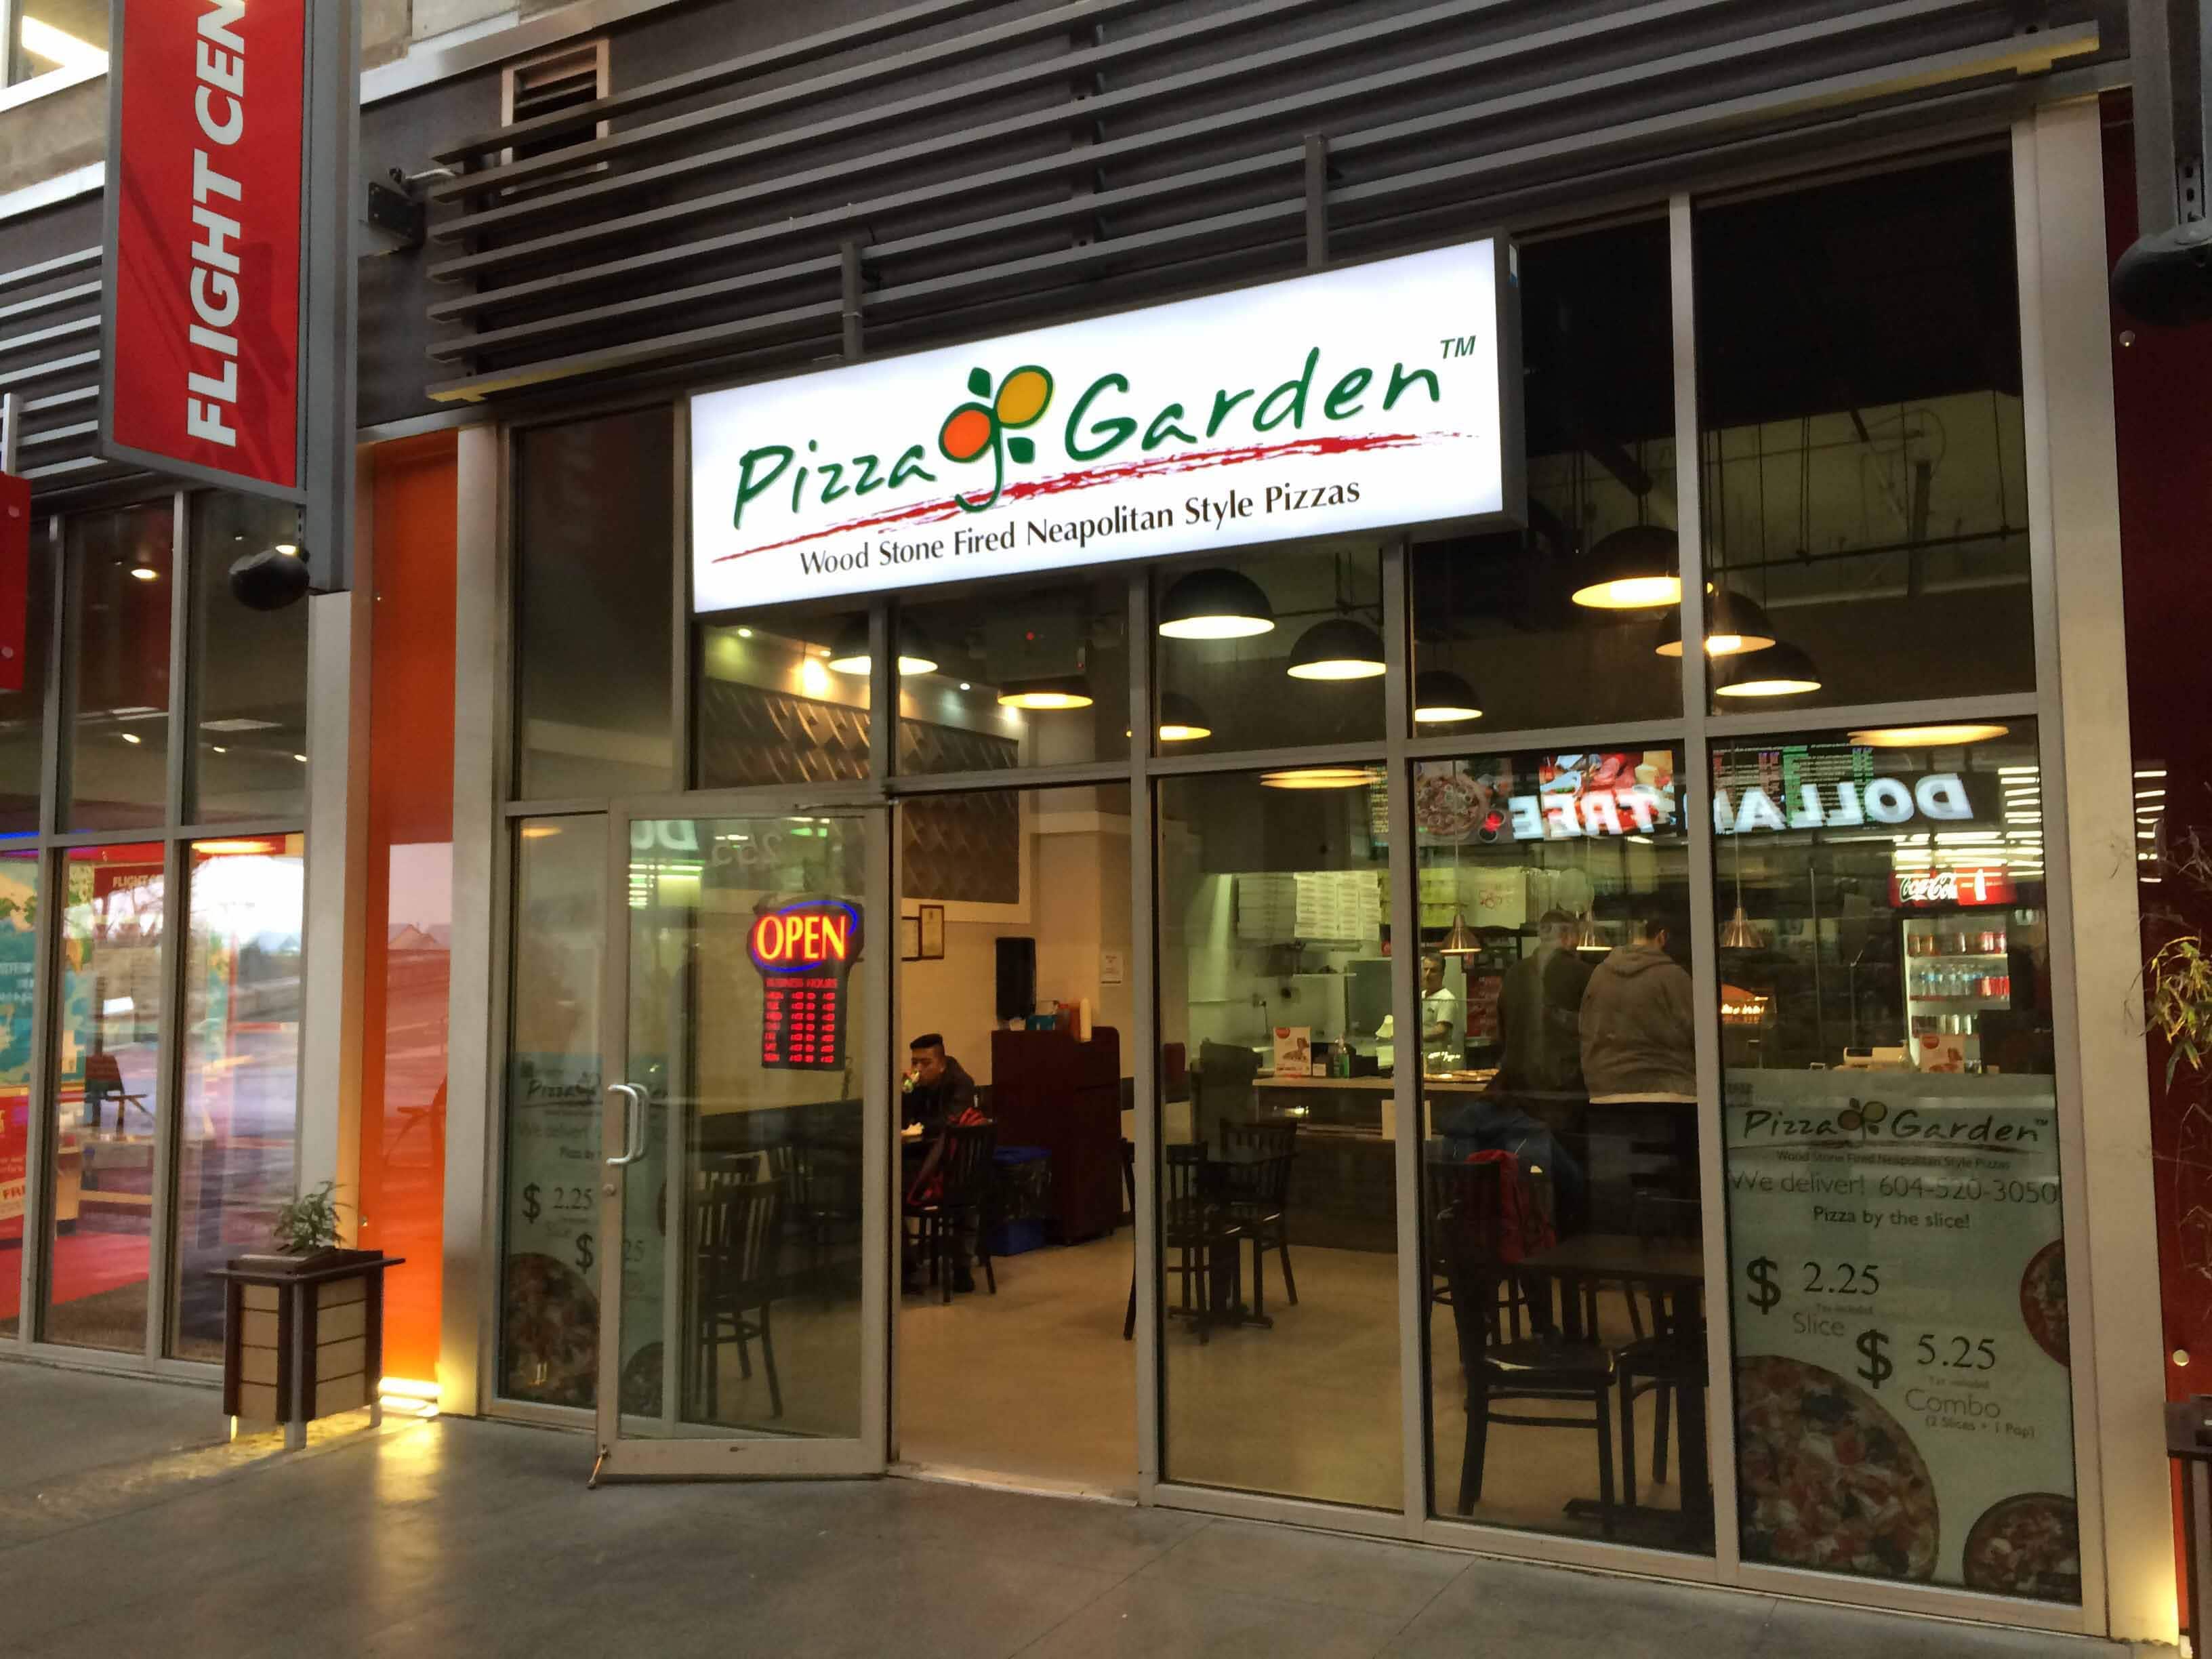 Now Open Pizza Garden At The Amazing Brentwood Town Centre Burnaby Lougheed Willingdon Tables Food Court Vancouver Food And Travel Guide Gutom Ca Gutom